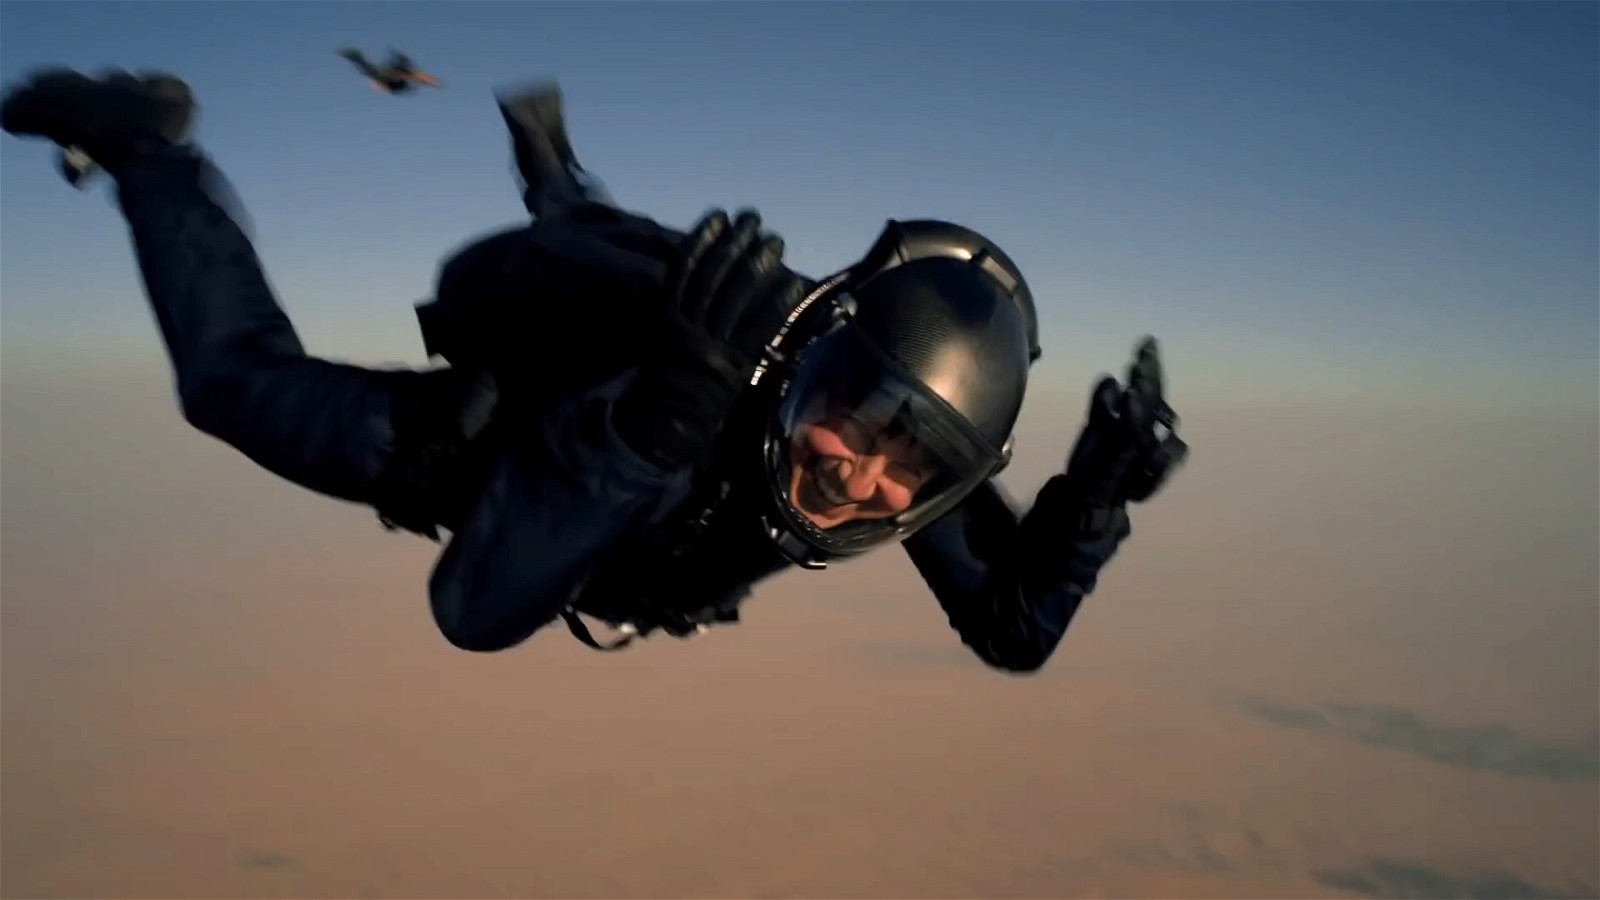 Tom Cruise jumped 106 times for this scene